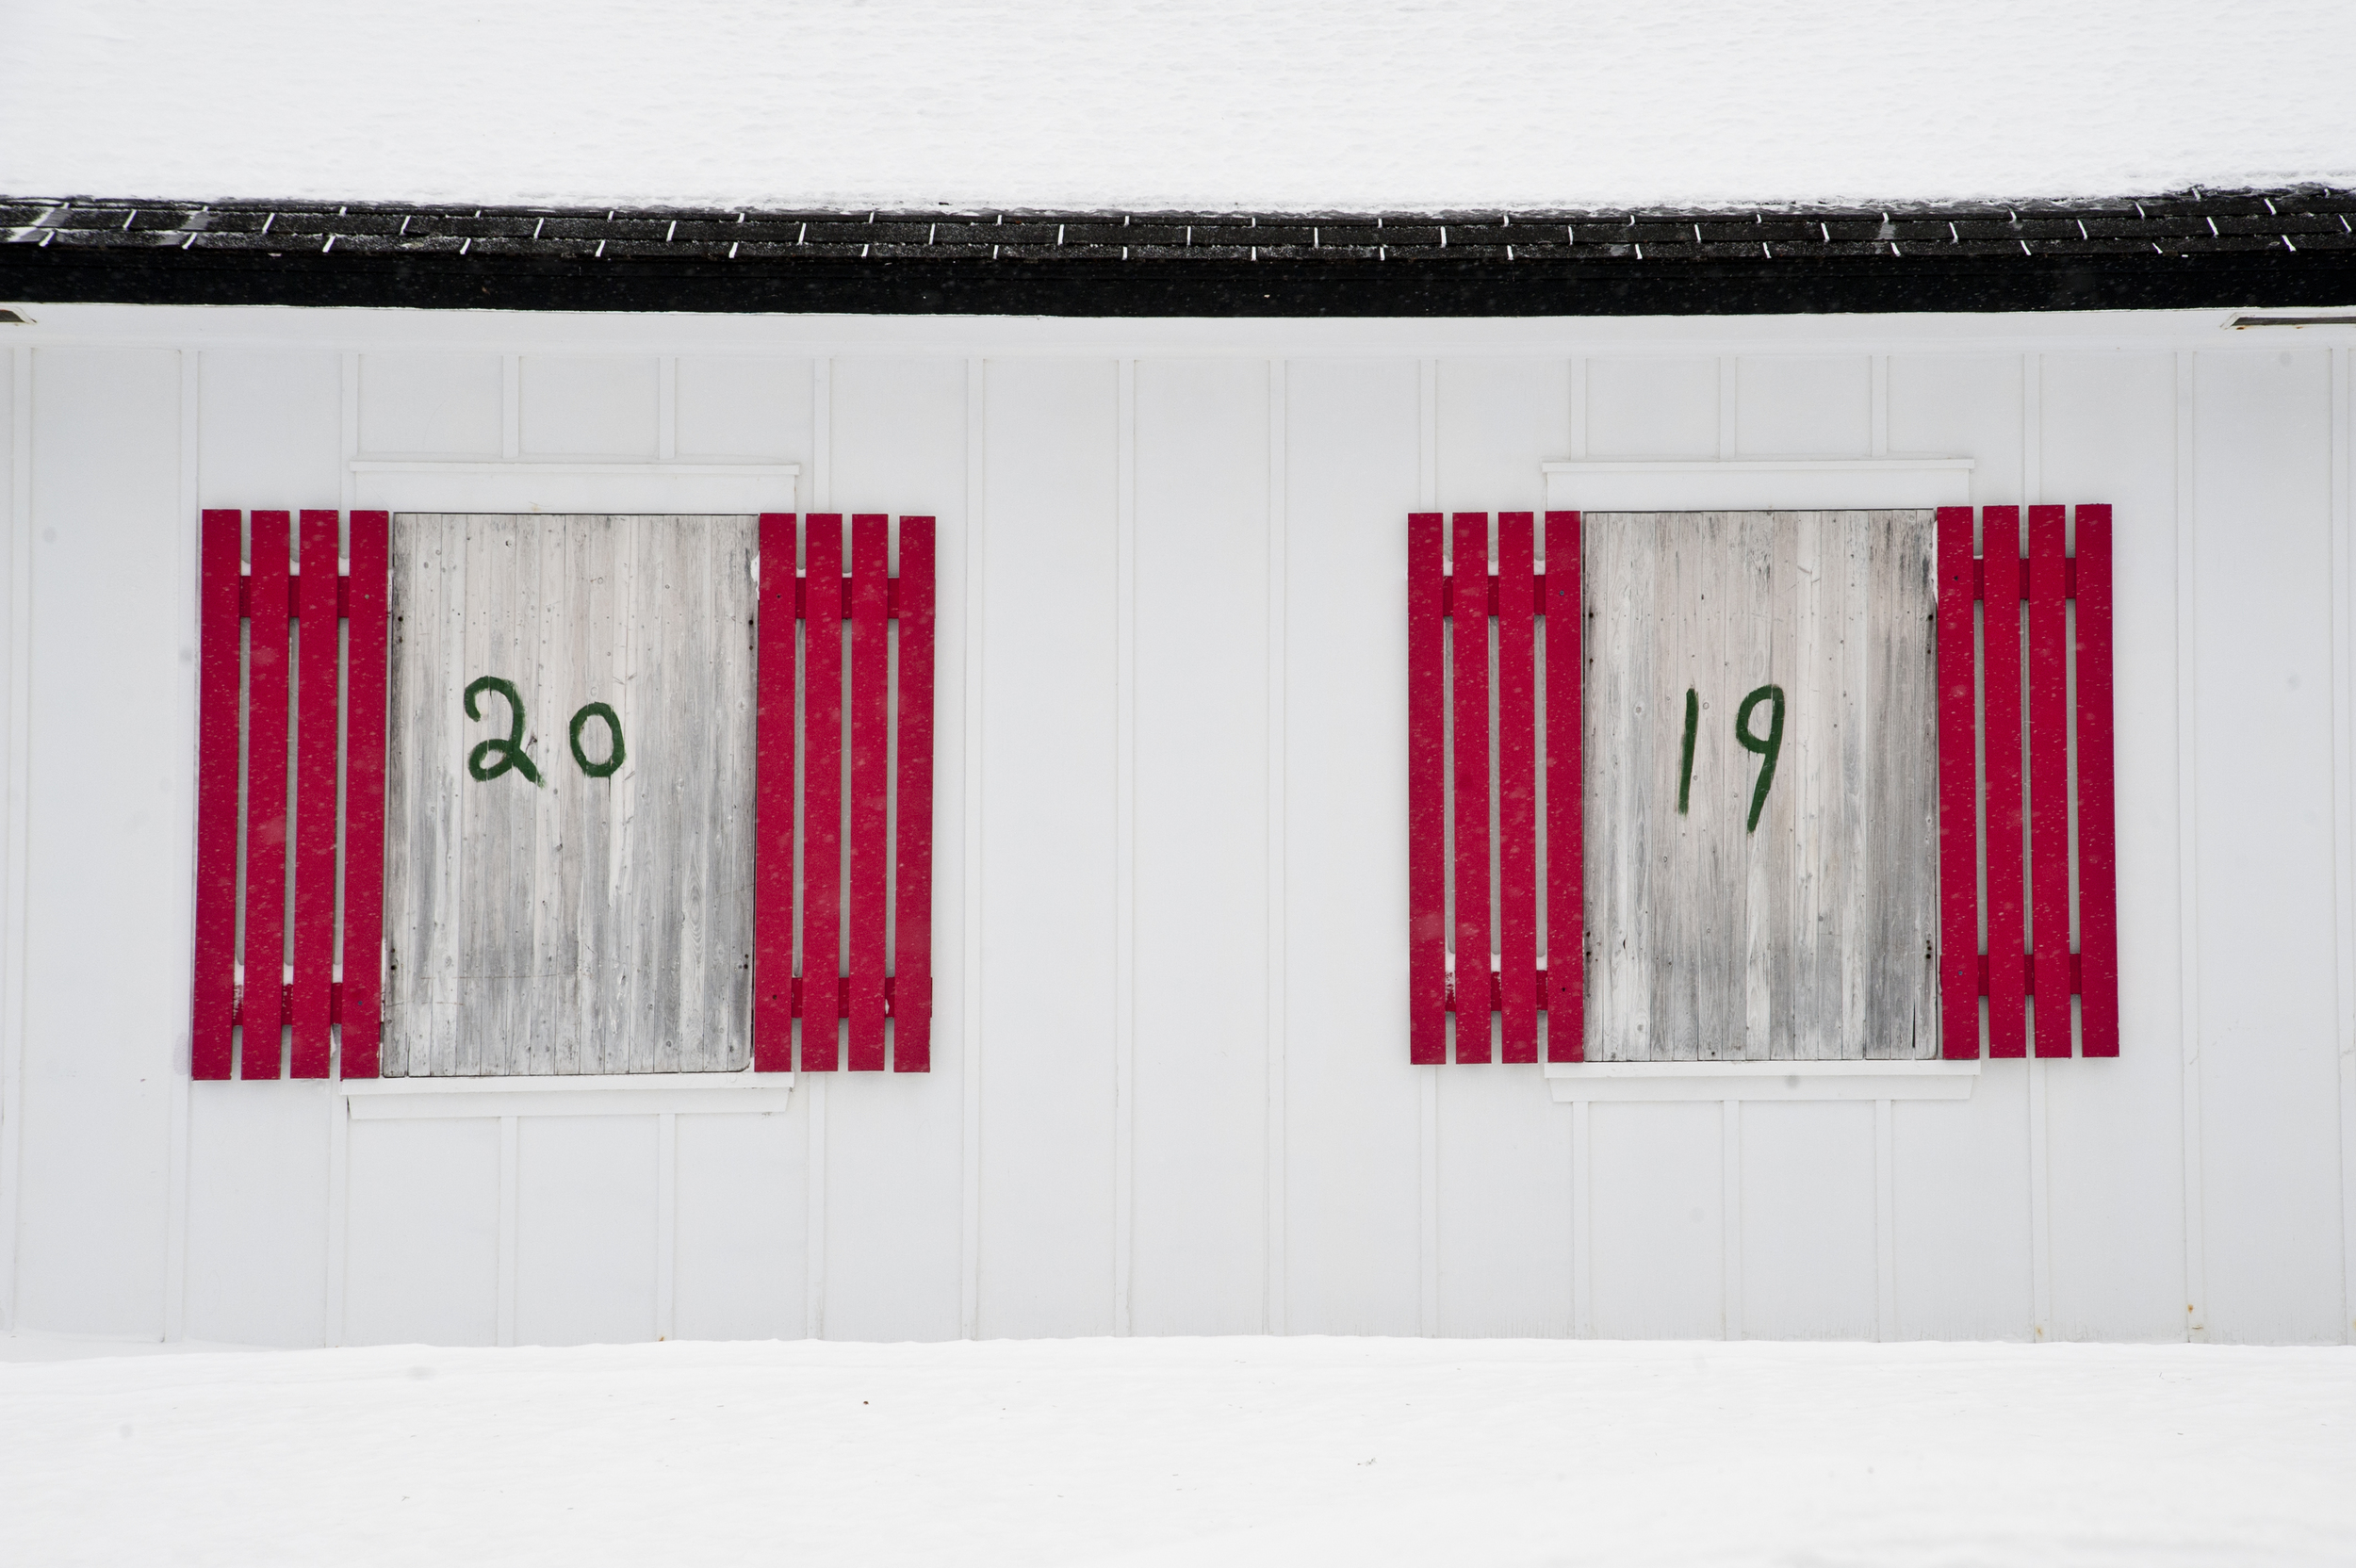   &nbsp; Red Shutters | Volets Rouges  